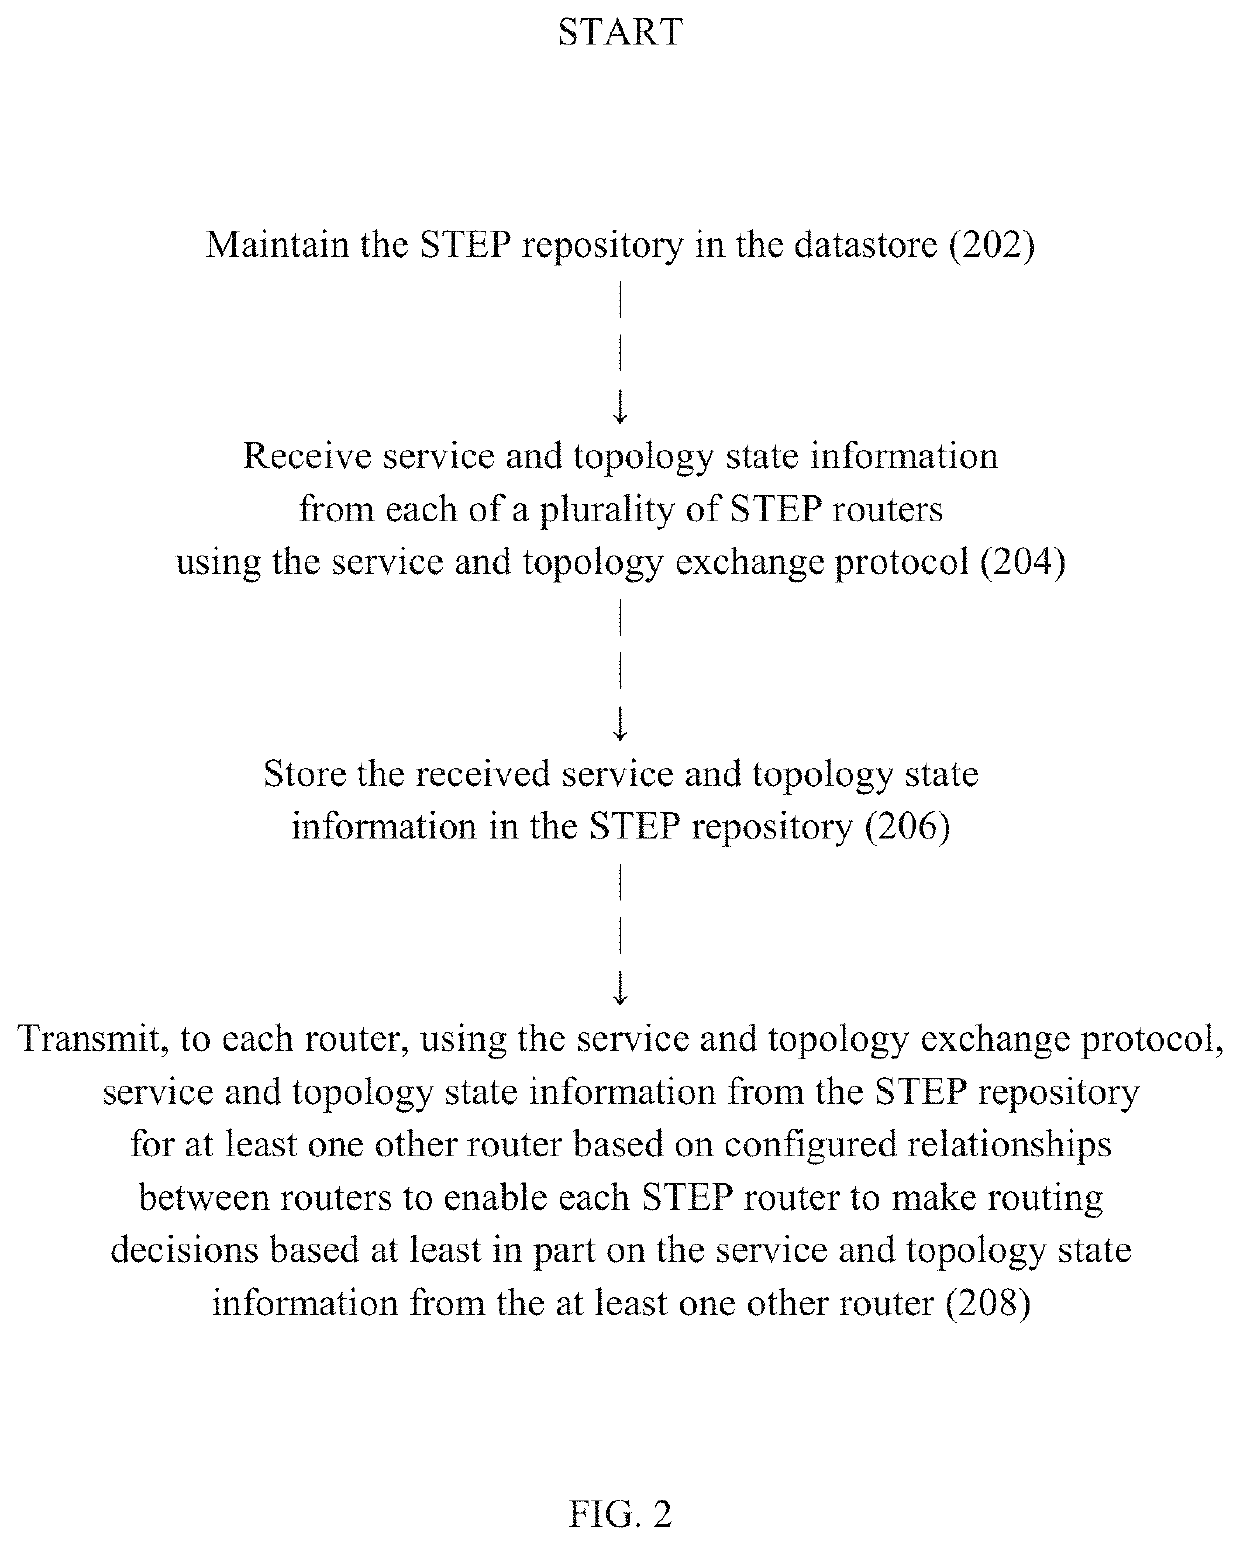 Source-based routing